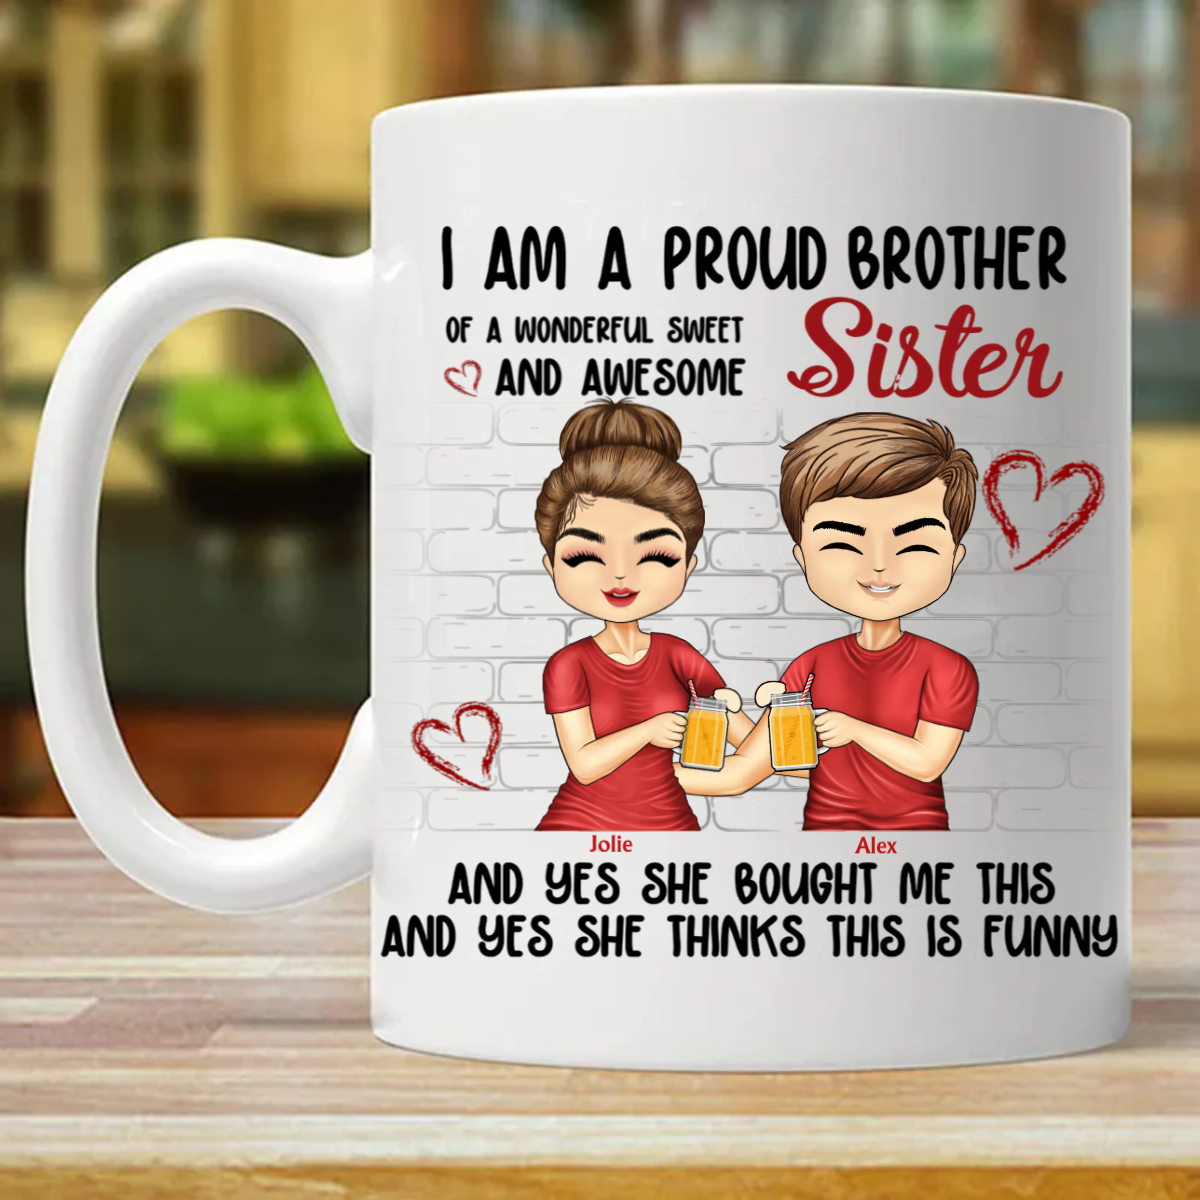 I'm A Proud Brother Of A Wonderful Sweet & Awesome Sister - Gift For Brothers, Sisters, Siblings - Personalized Custom Mug (Double-sided Printing)